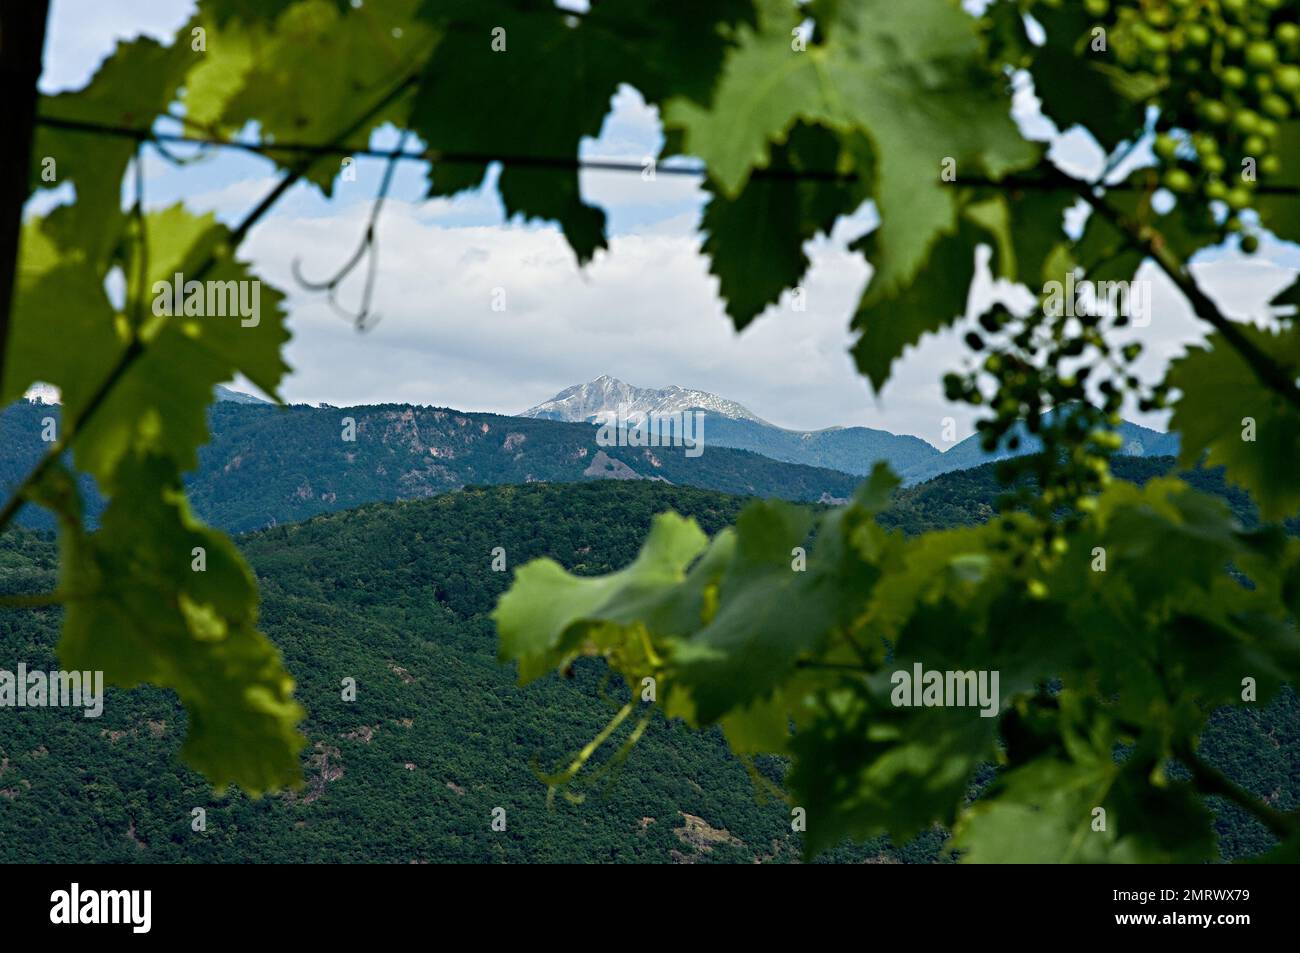 Peering through grape leaves at the Tyrol Mountains in the distance in Alto Adige, Italy. Stock Photo